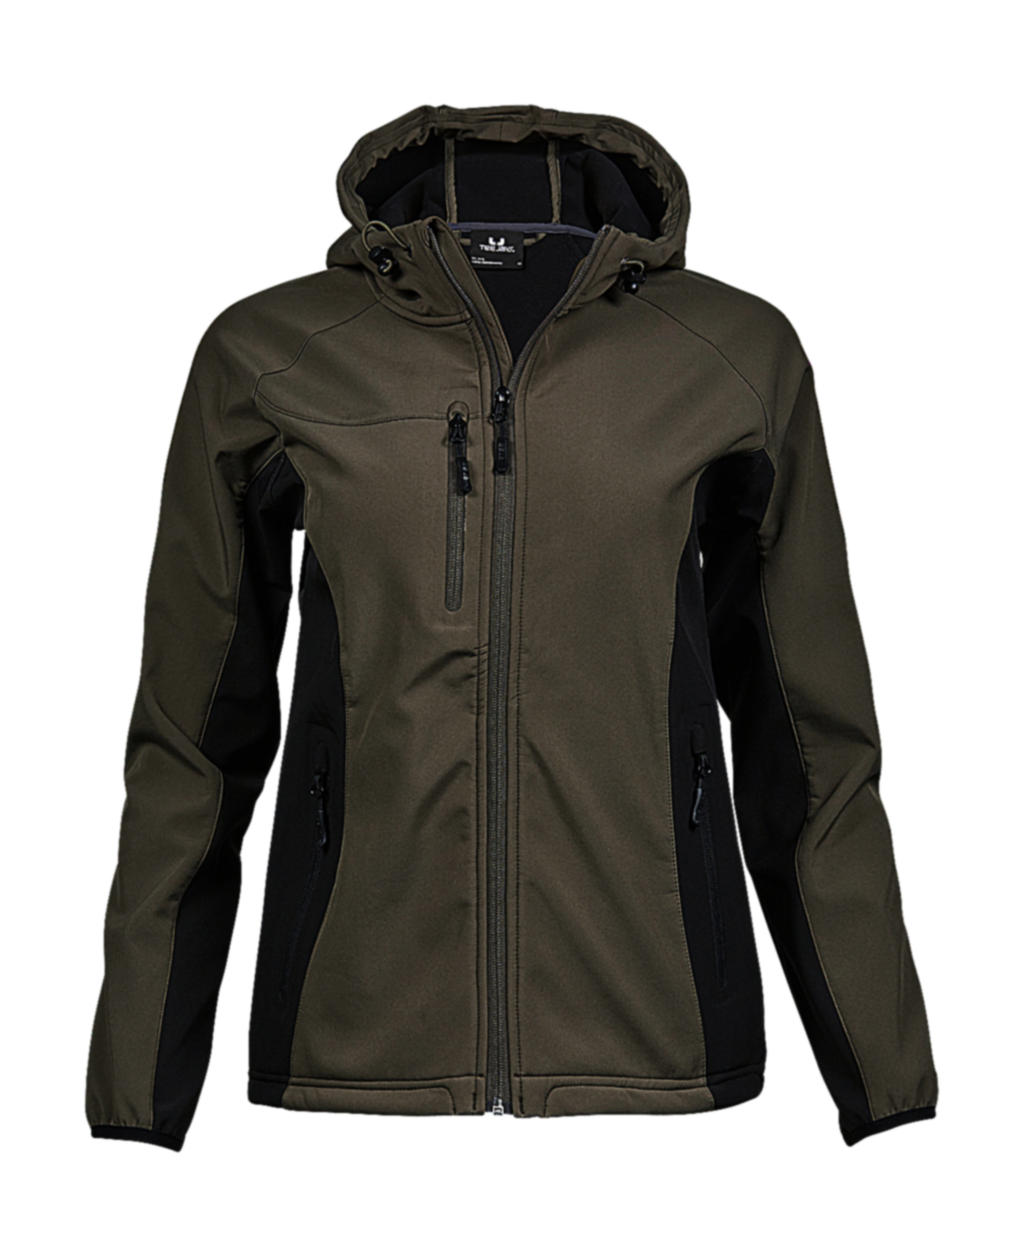  Ladies Hooded Lightweight Performance Softshell in Farbe Olive/Black